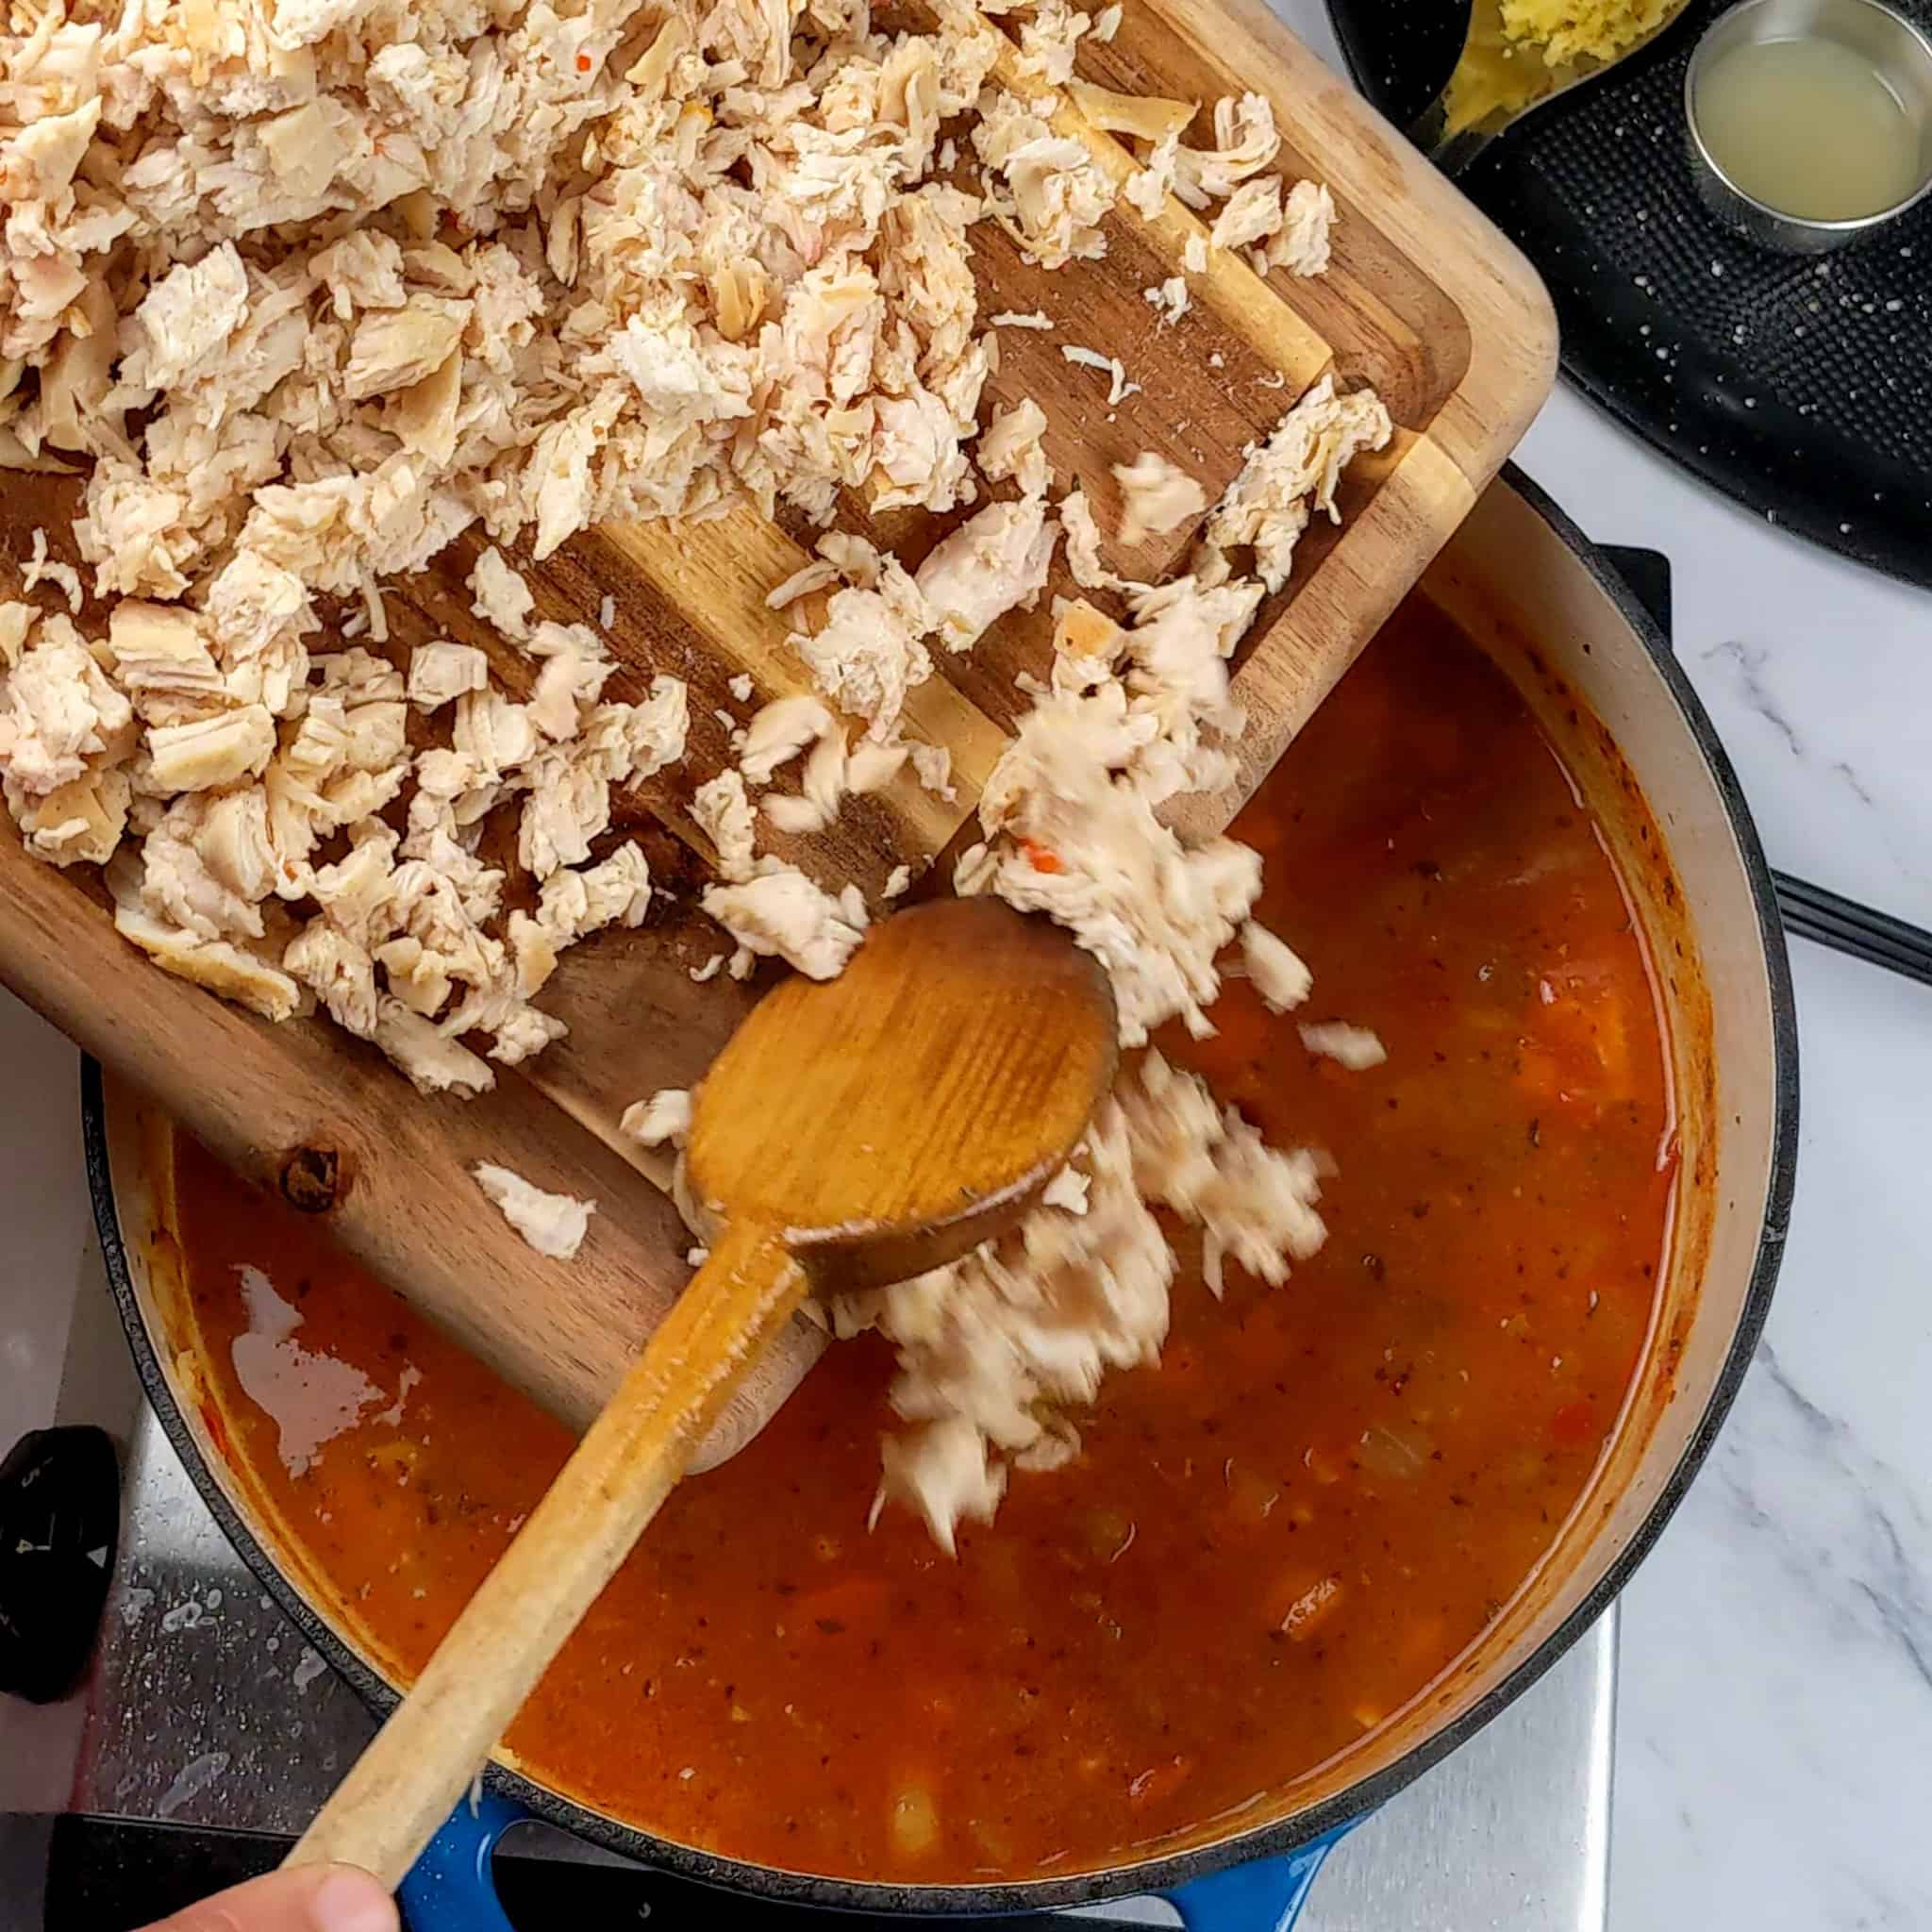 chopped boneless skinless cooked chicken breast on a small wooden cutting board being added to a tomato based broth with a wooden spoon